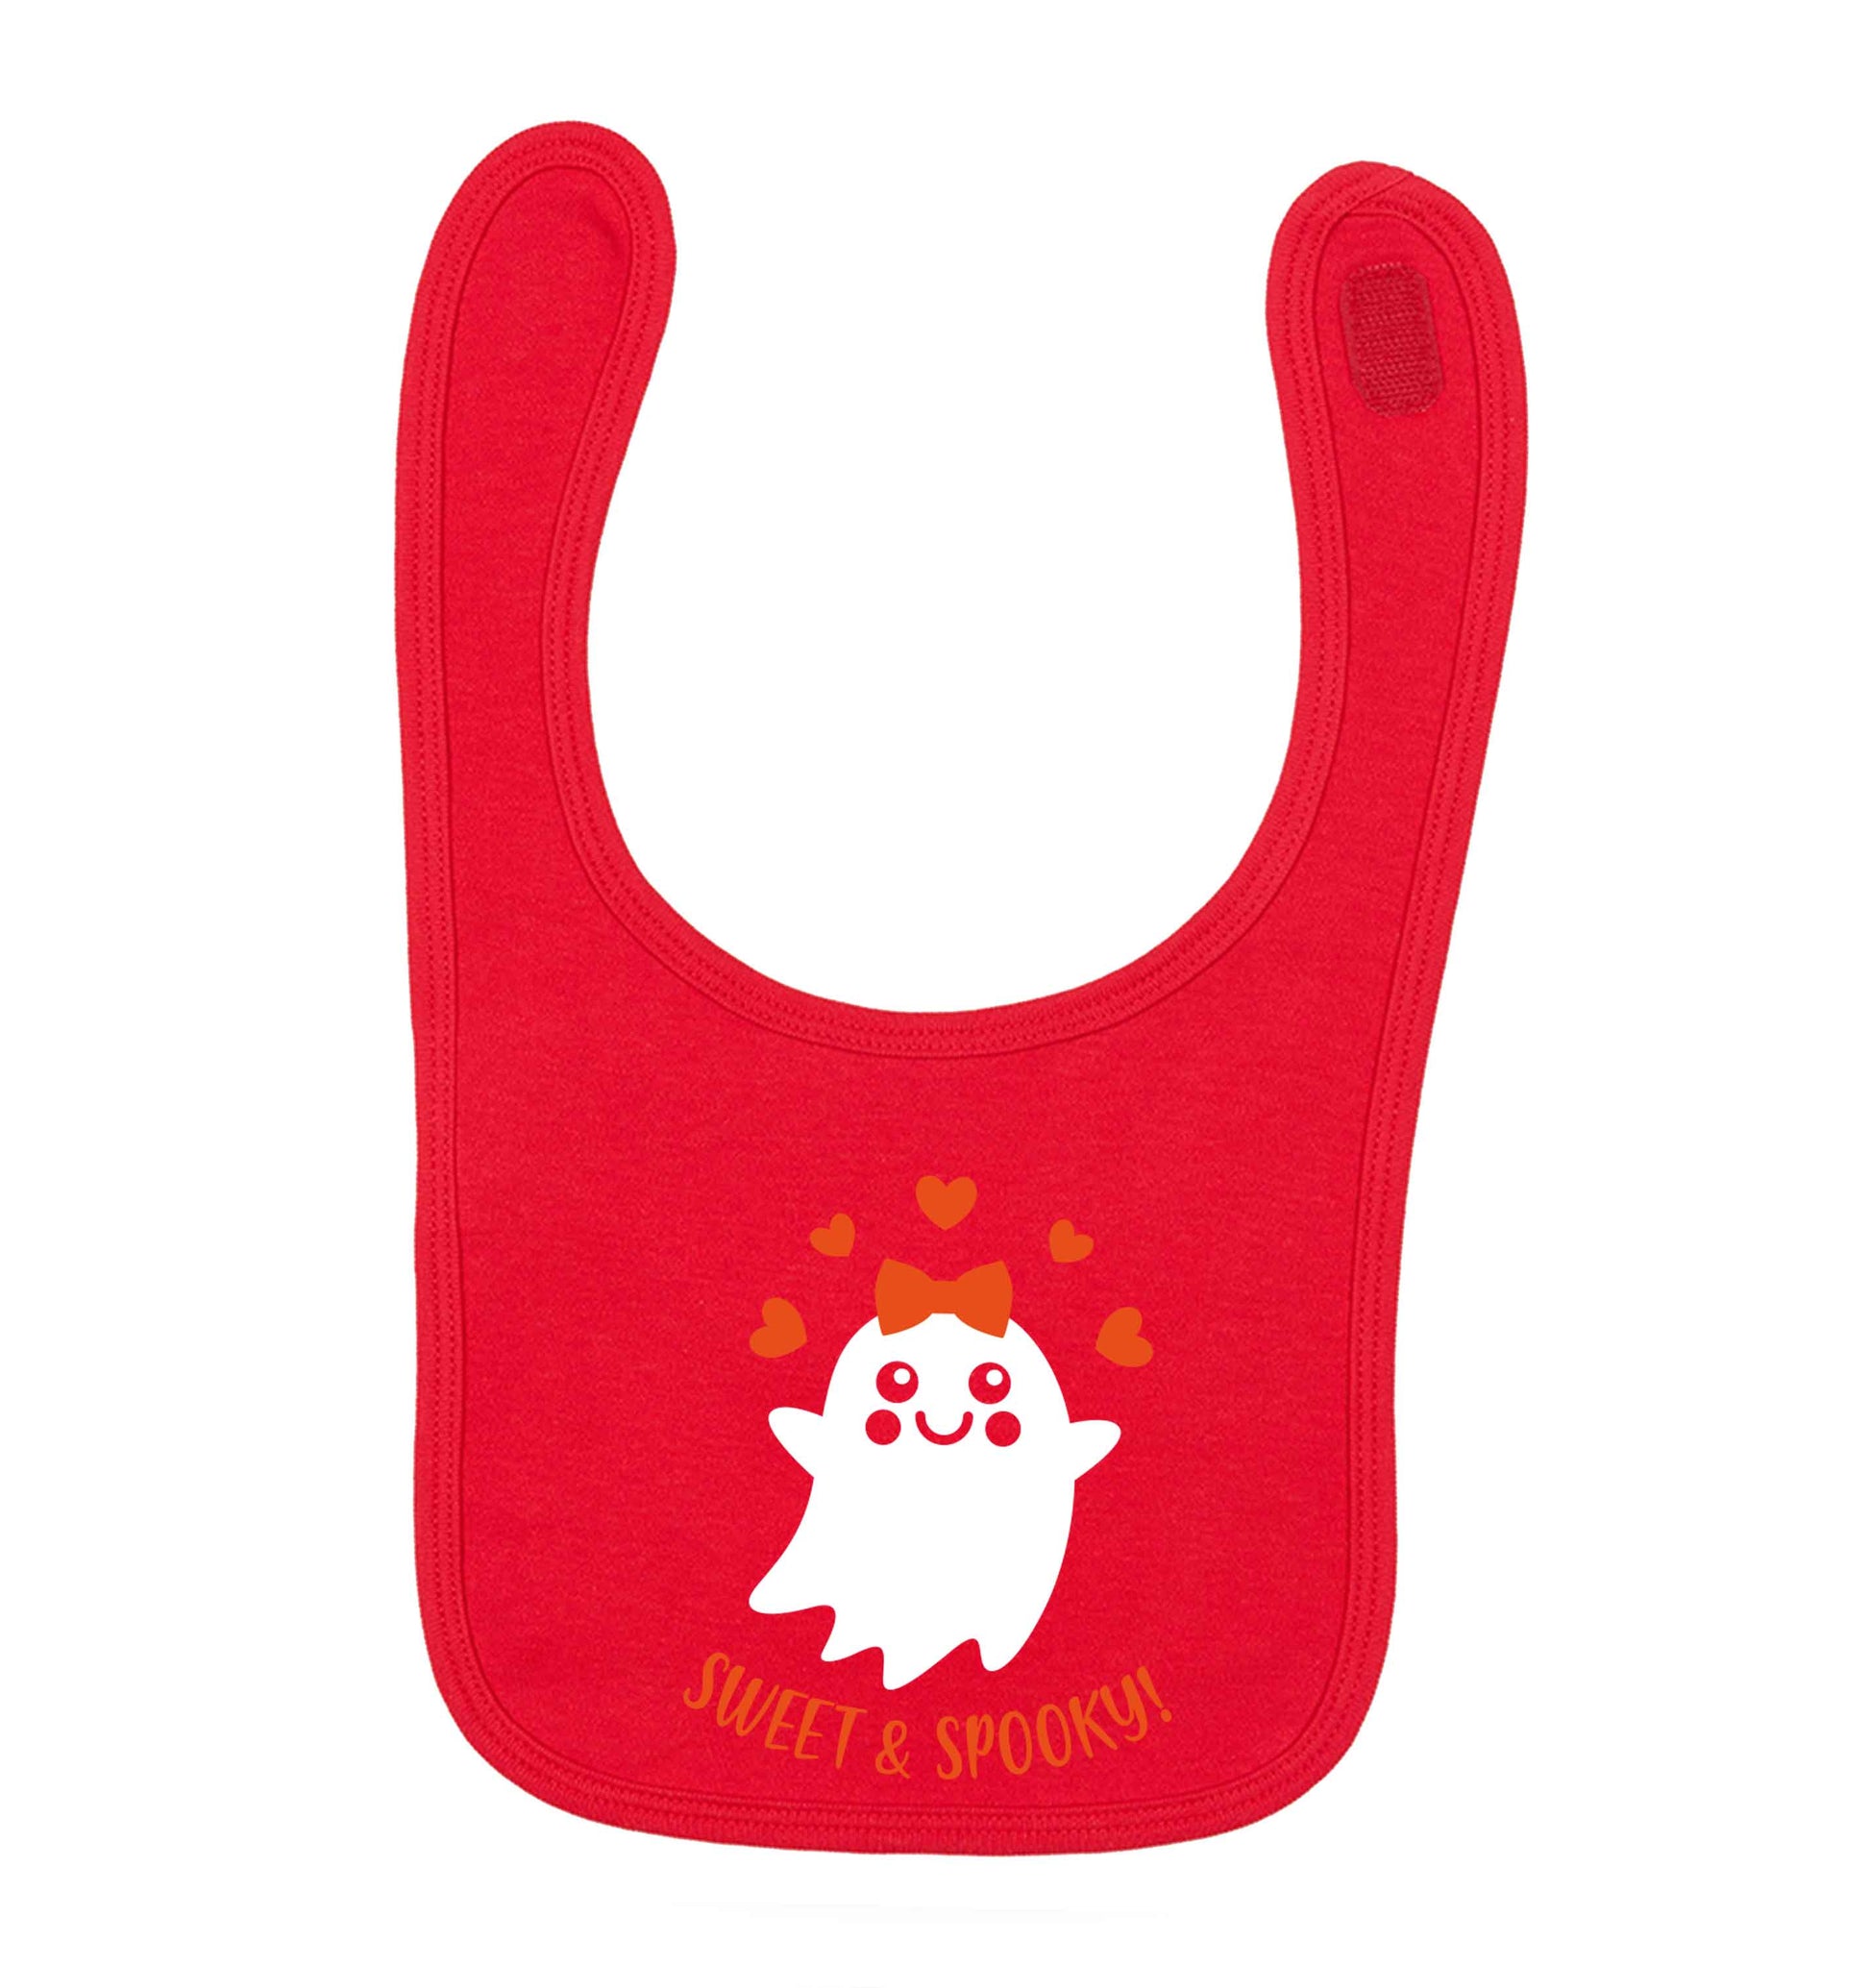 Sweet and spooky red baby bib